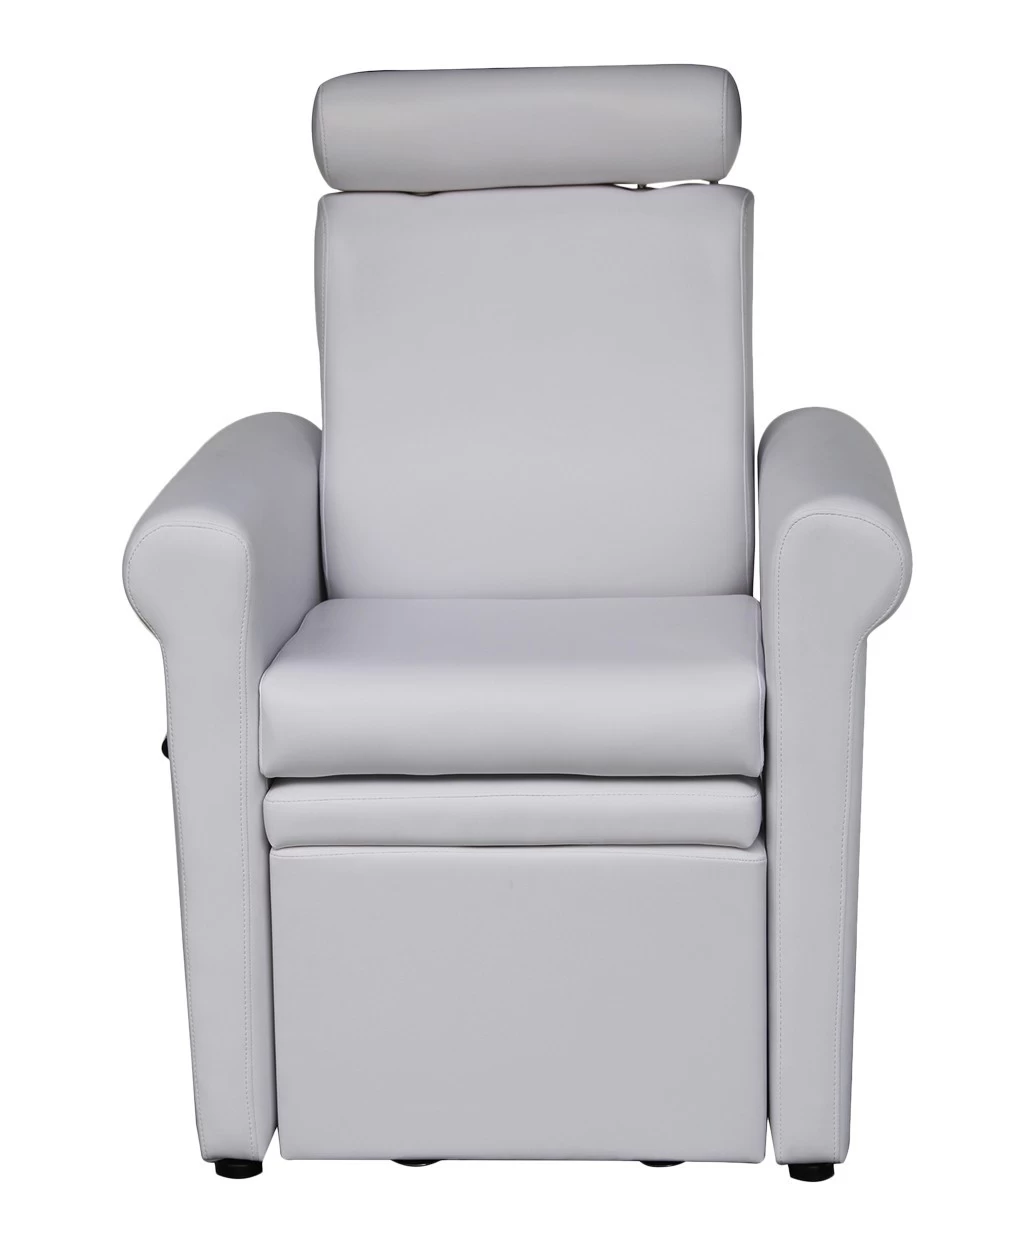 Pedicure chair wholesale with ceragem v3 price supplier for pedicure foot massage chair factory